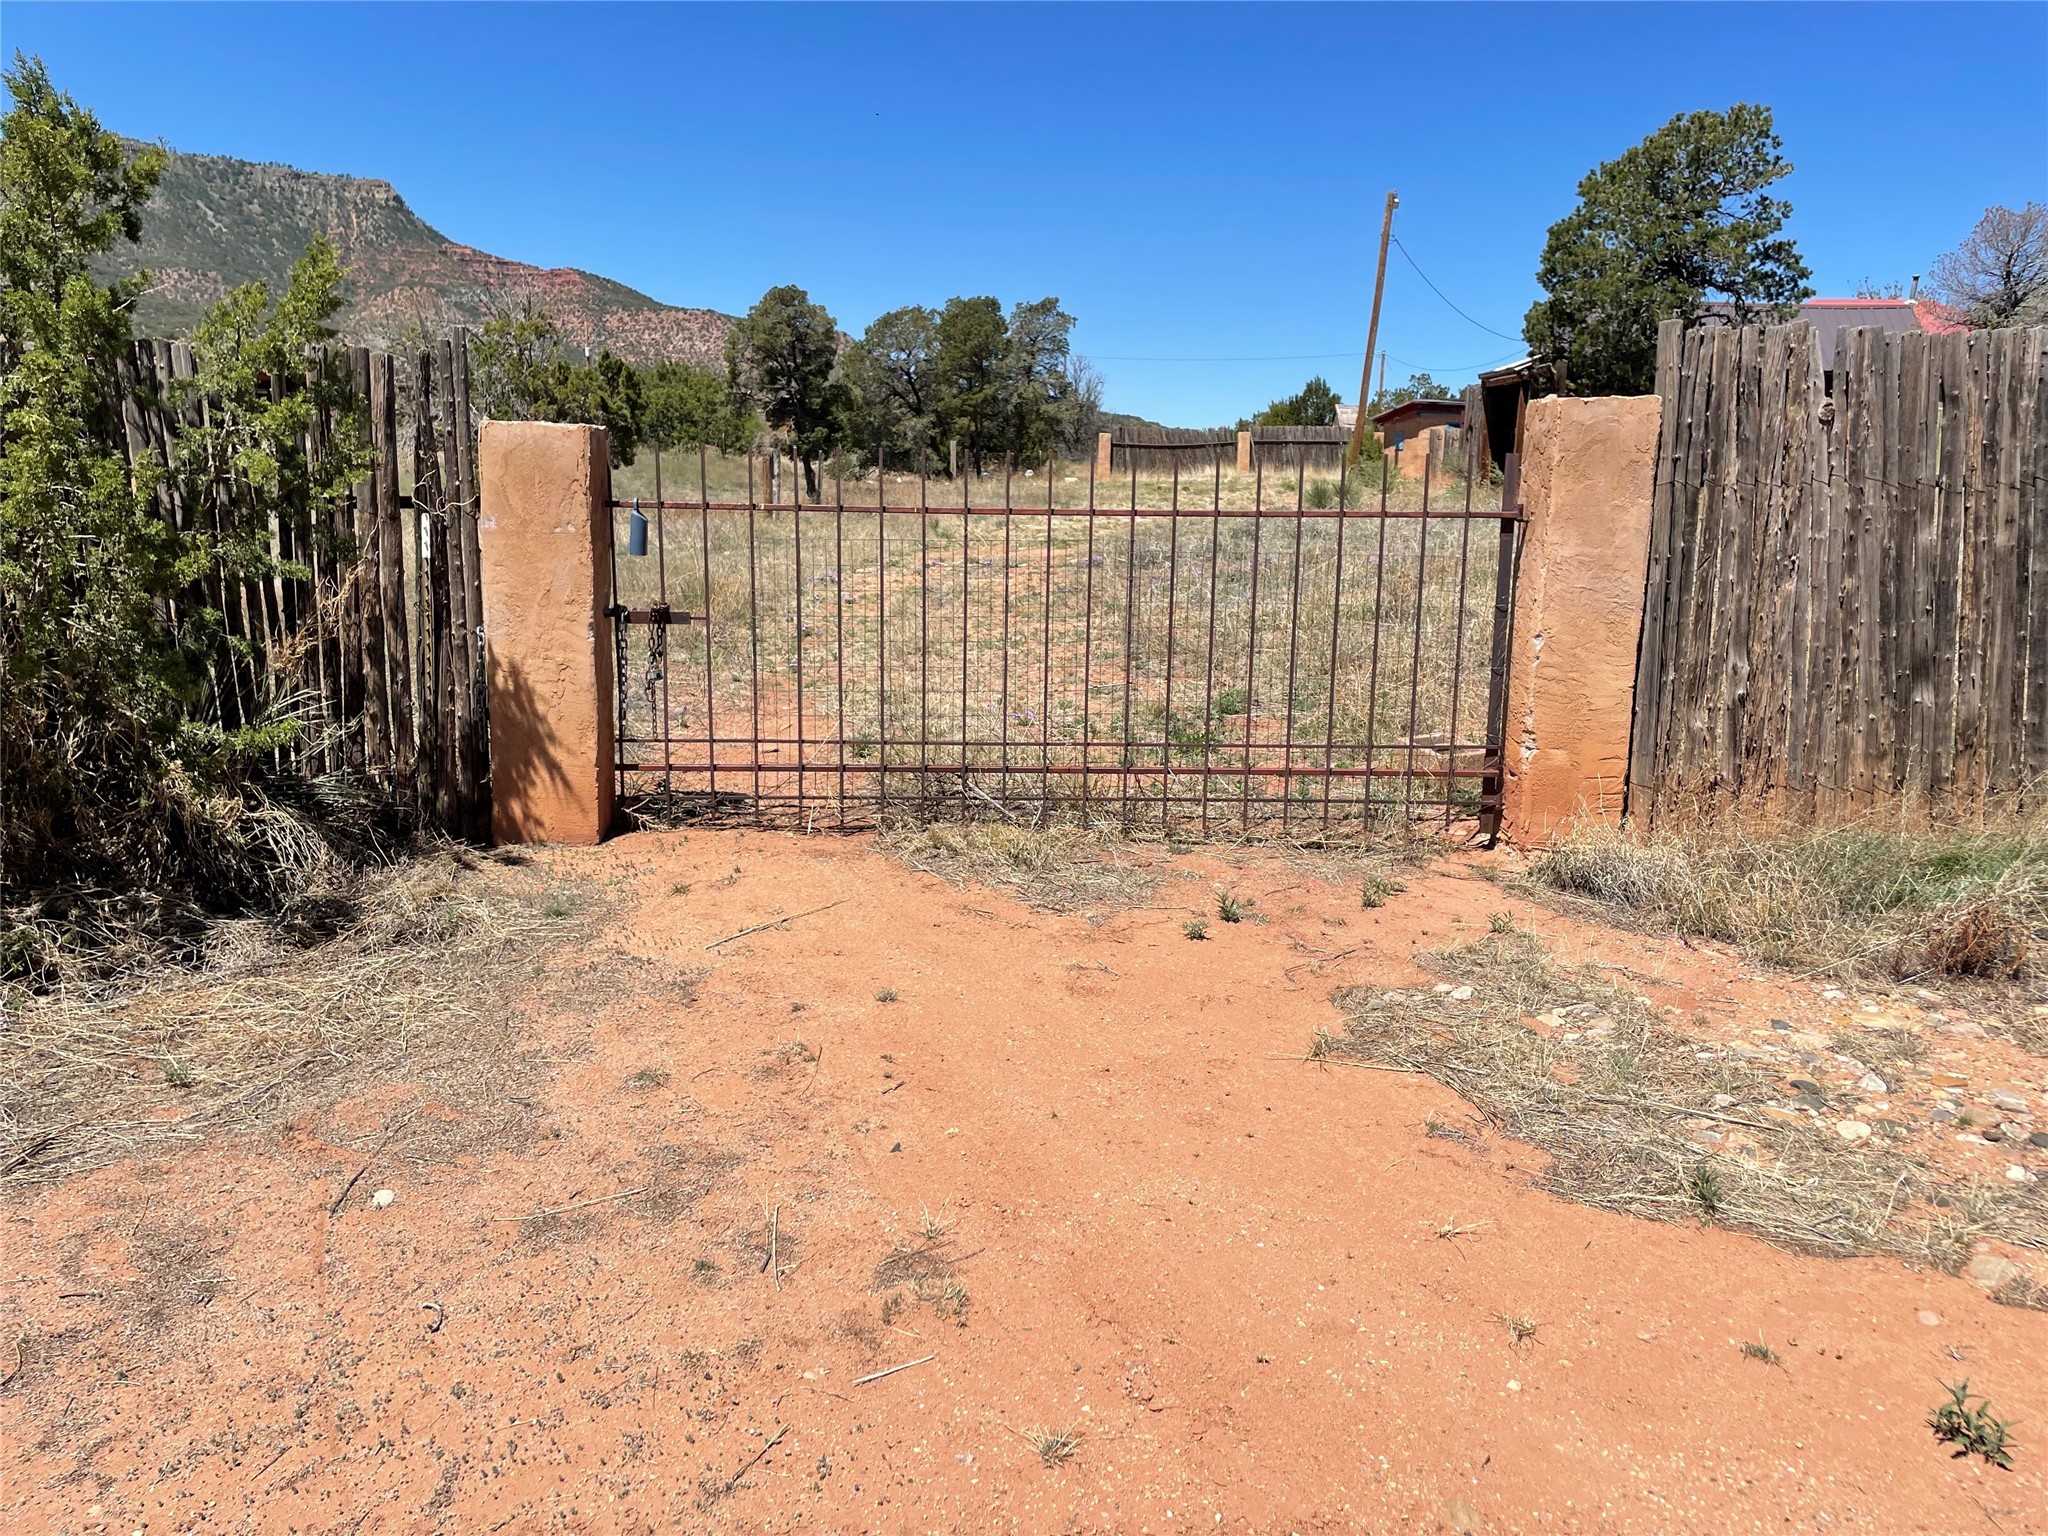 gate to property